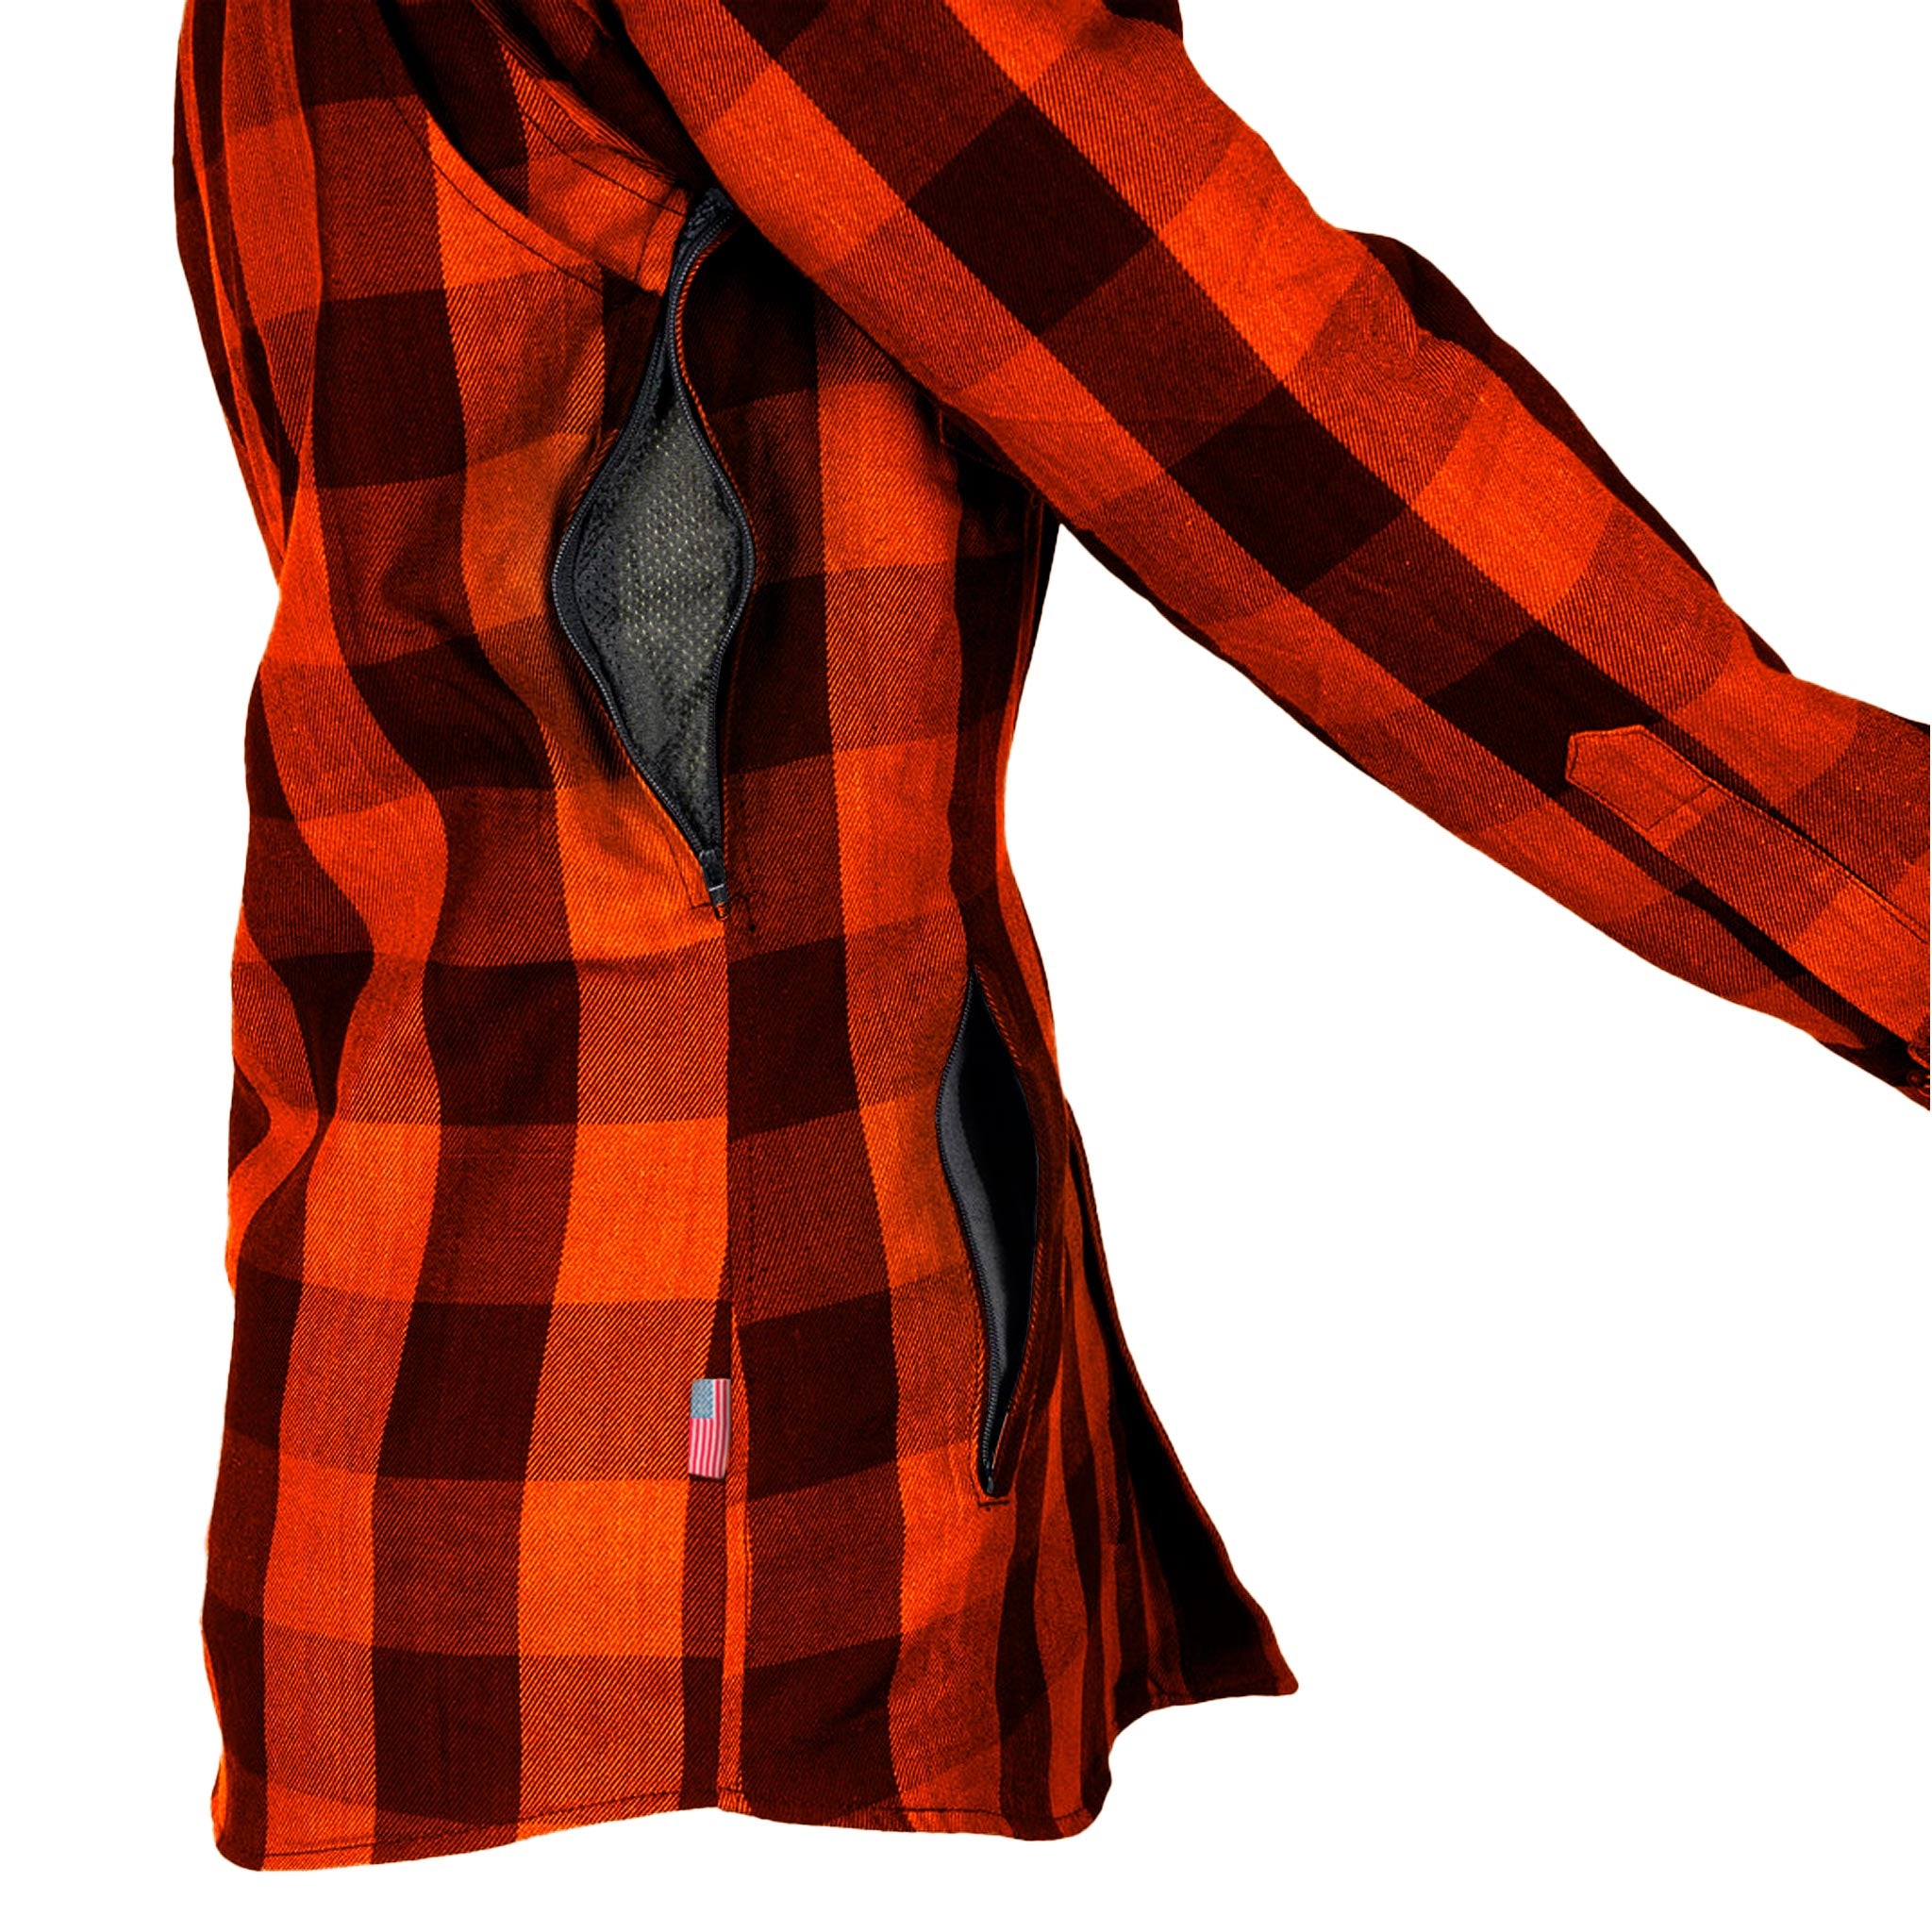 Protective Flannel Shirt for Women - Orange Checkered with Pads